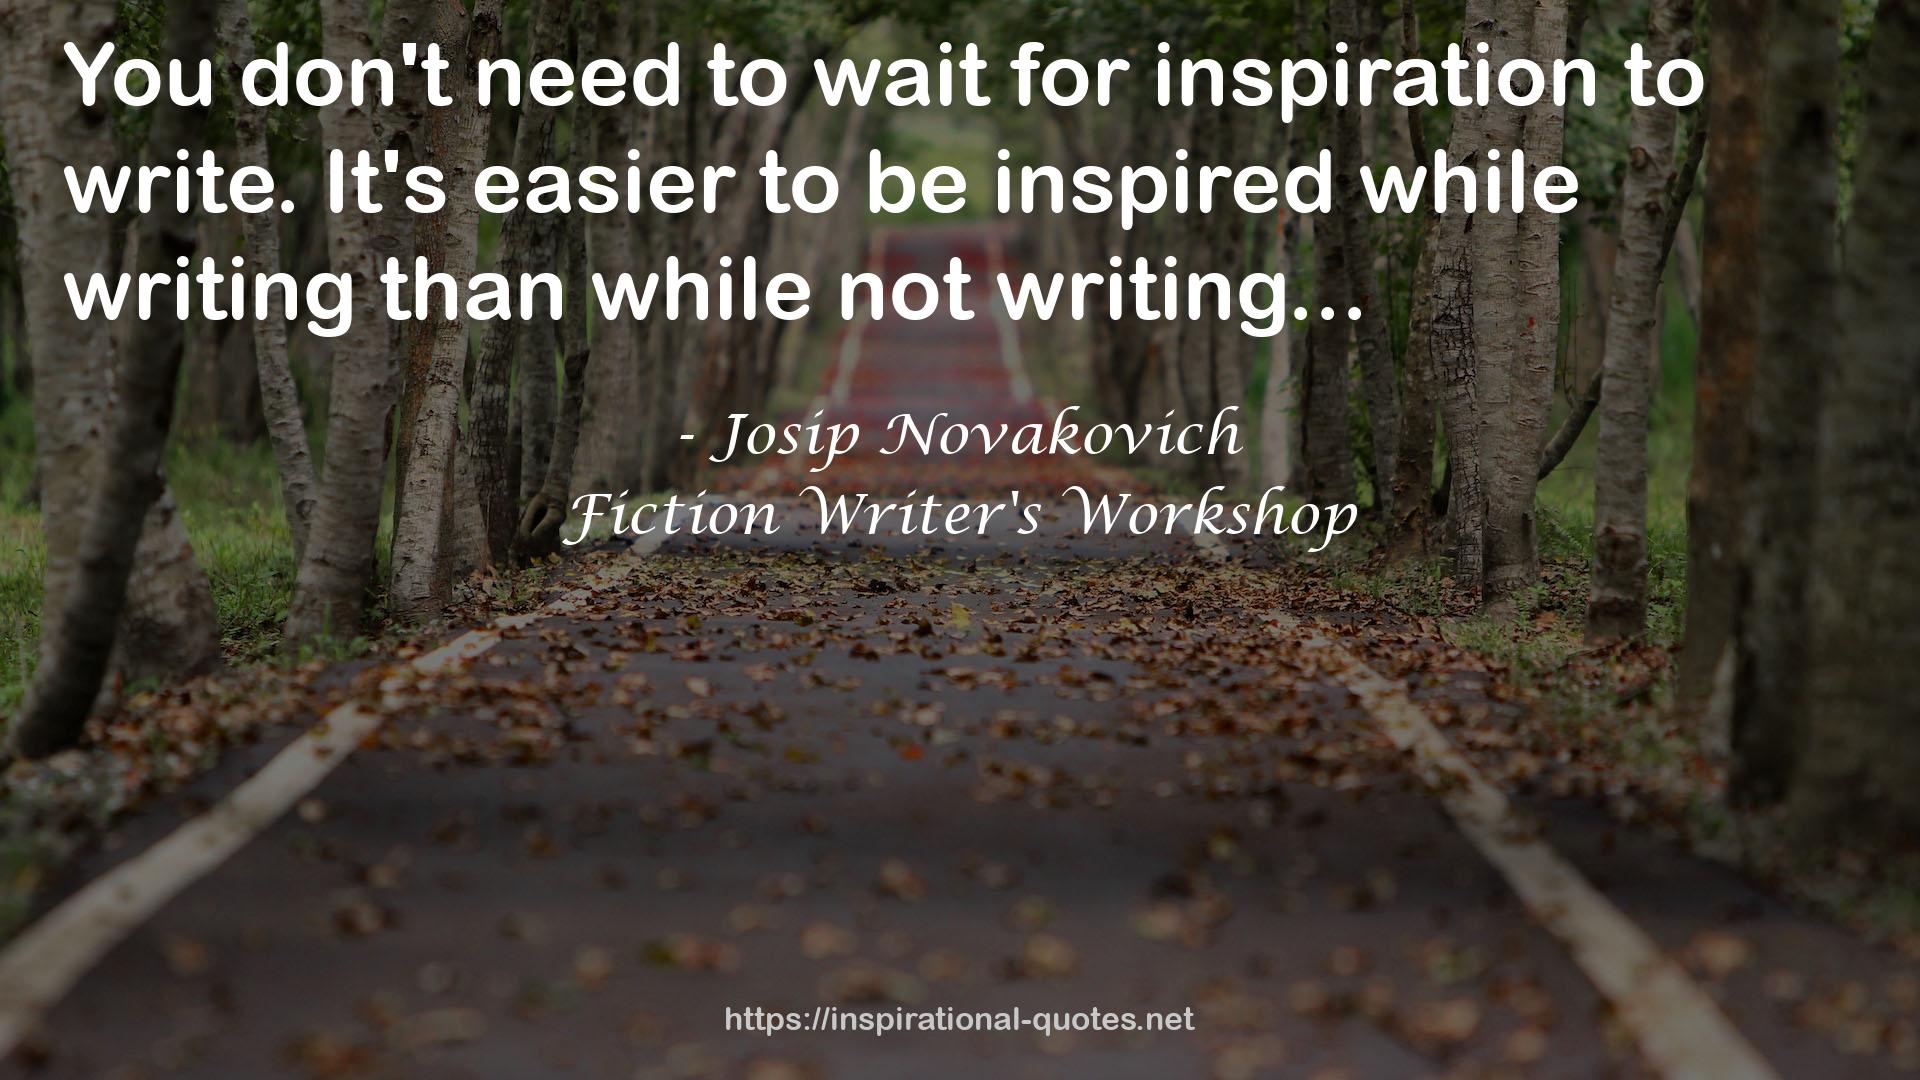 Fiction Writer's Workshop QUOTES